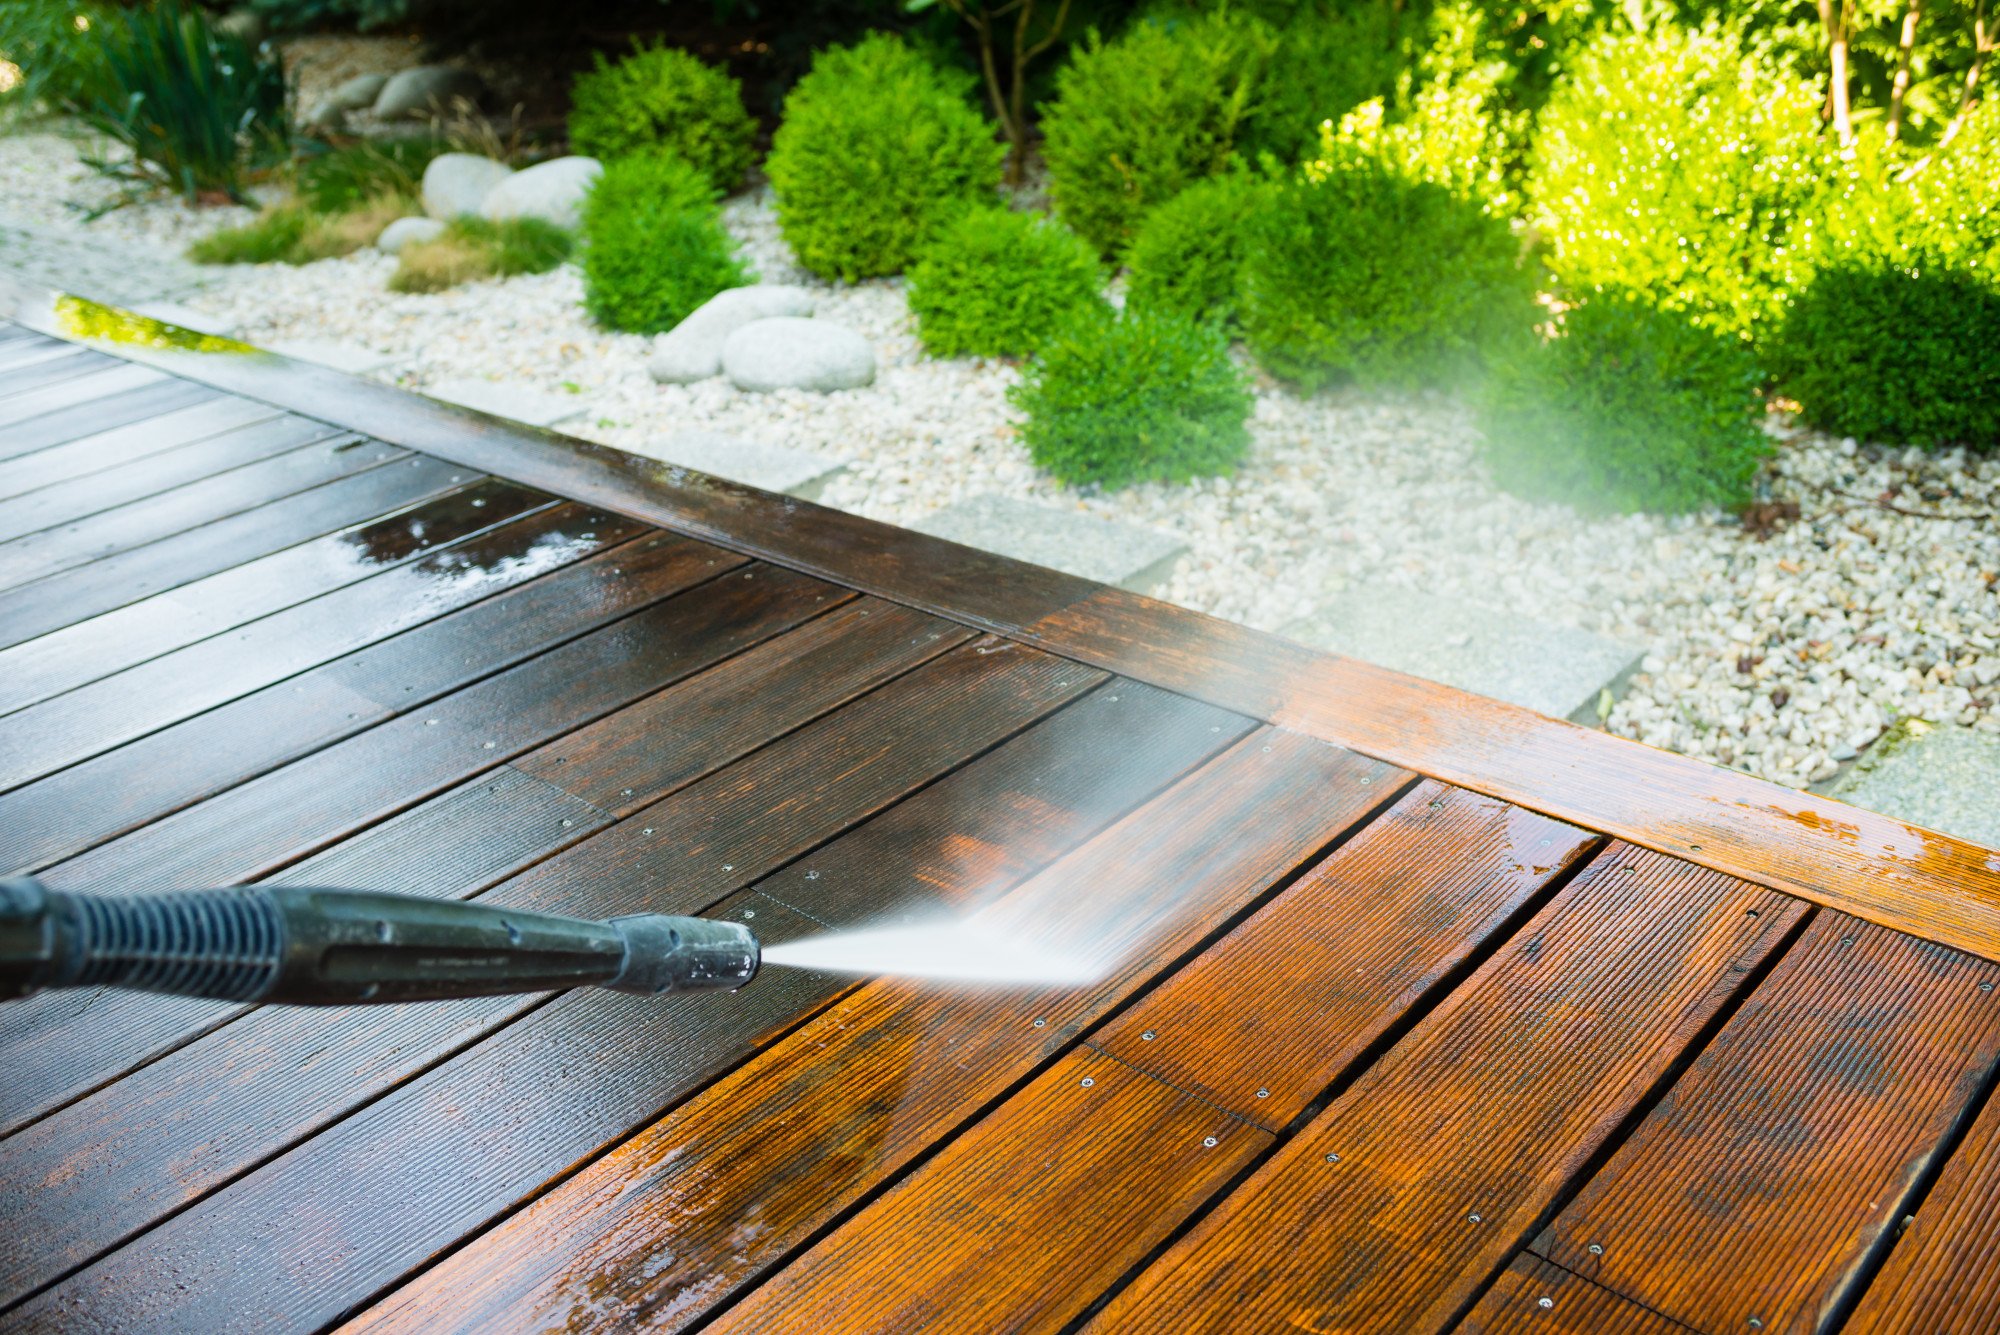 Cleaning Terrace With A Power Washer High Water Pressure Cleaner On Wooden Terrace Surface